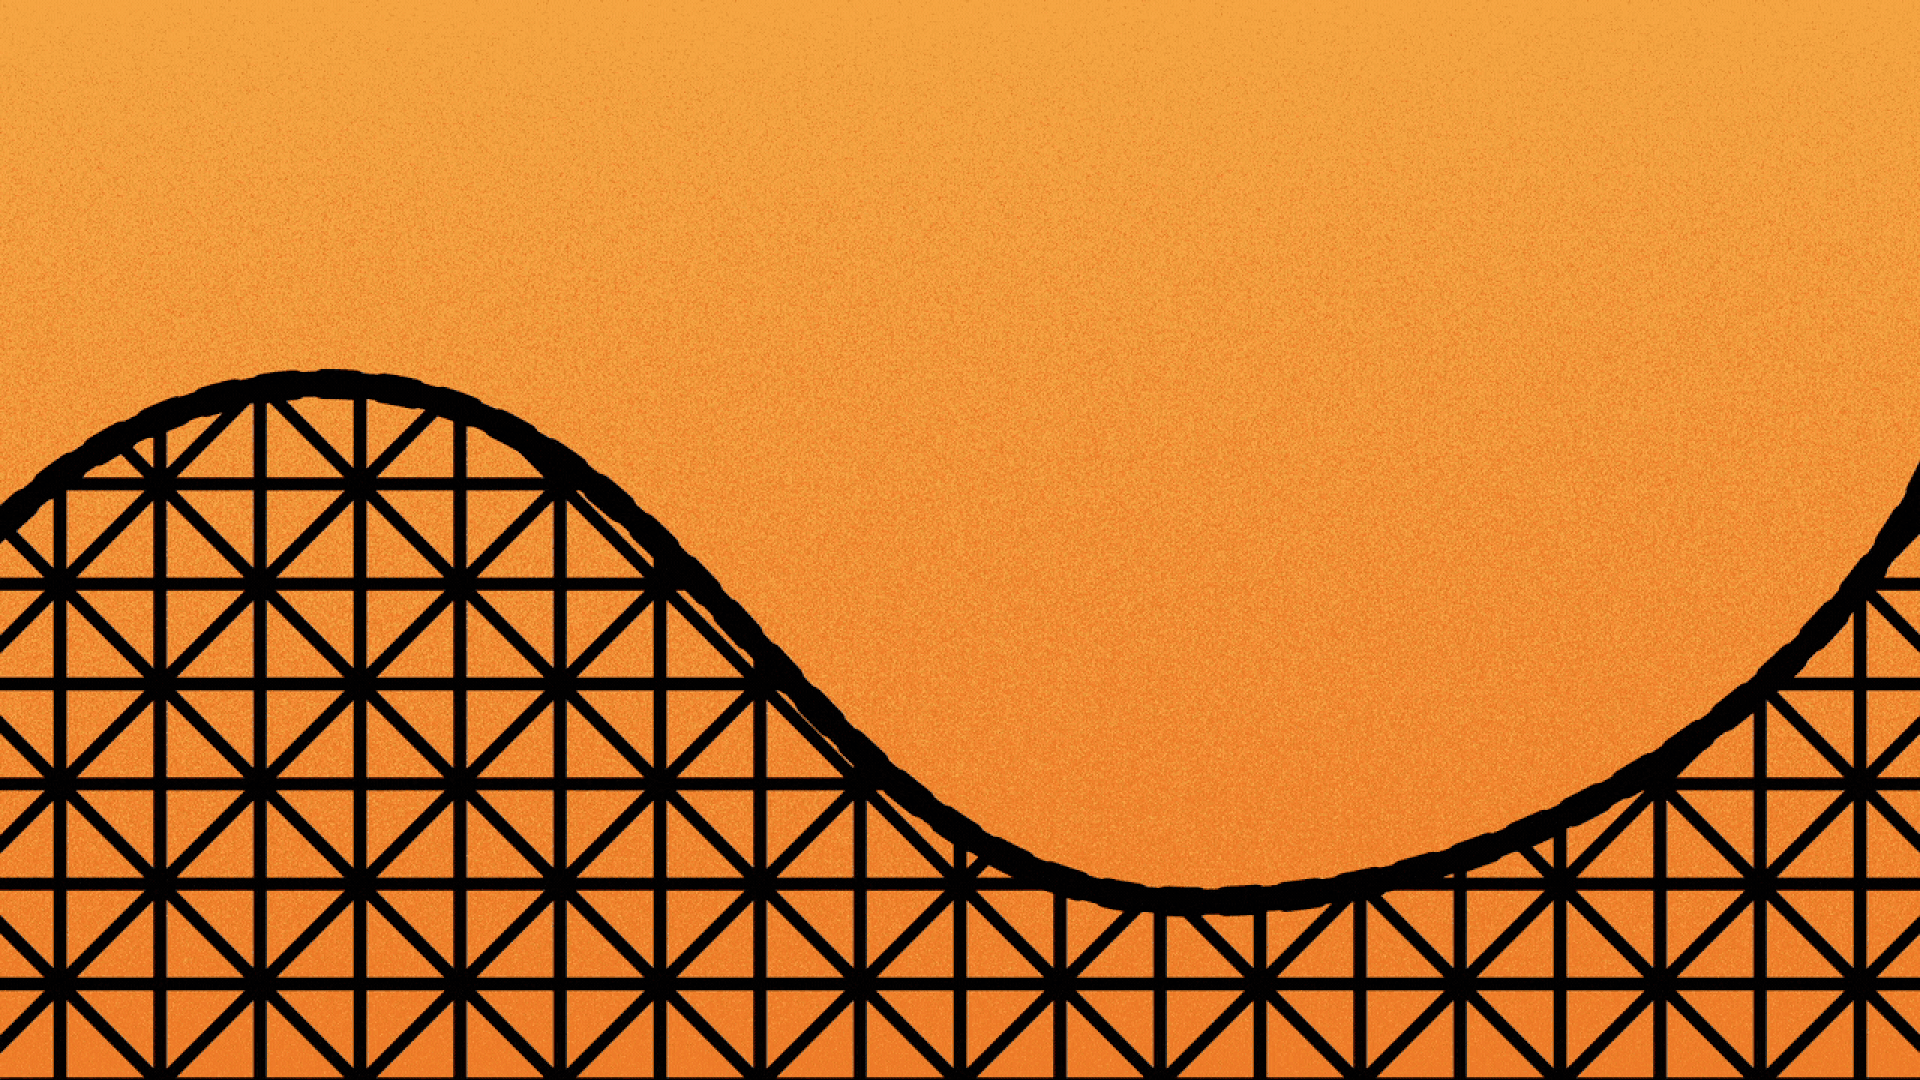 Illustration of a rollercoaster with salt and pepper shakers instead of cars.